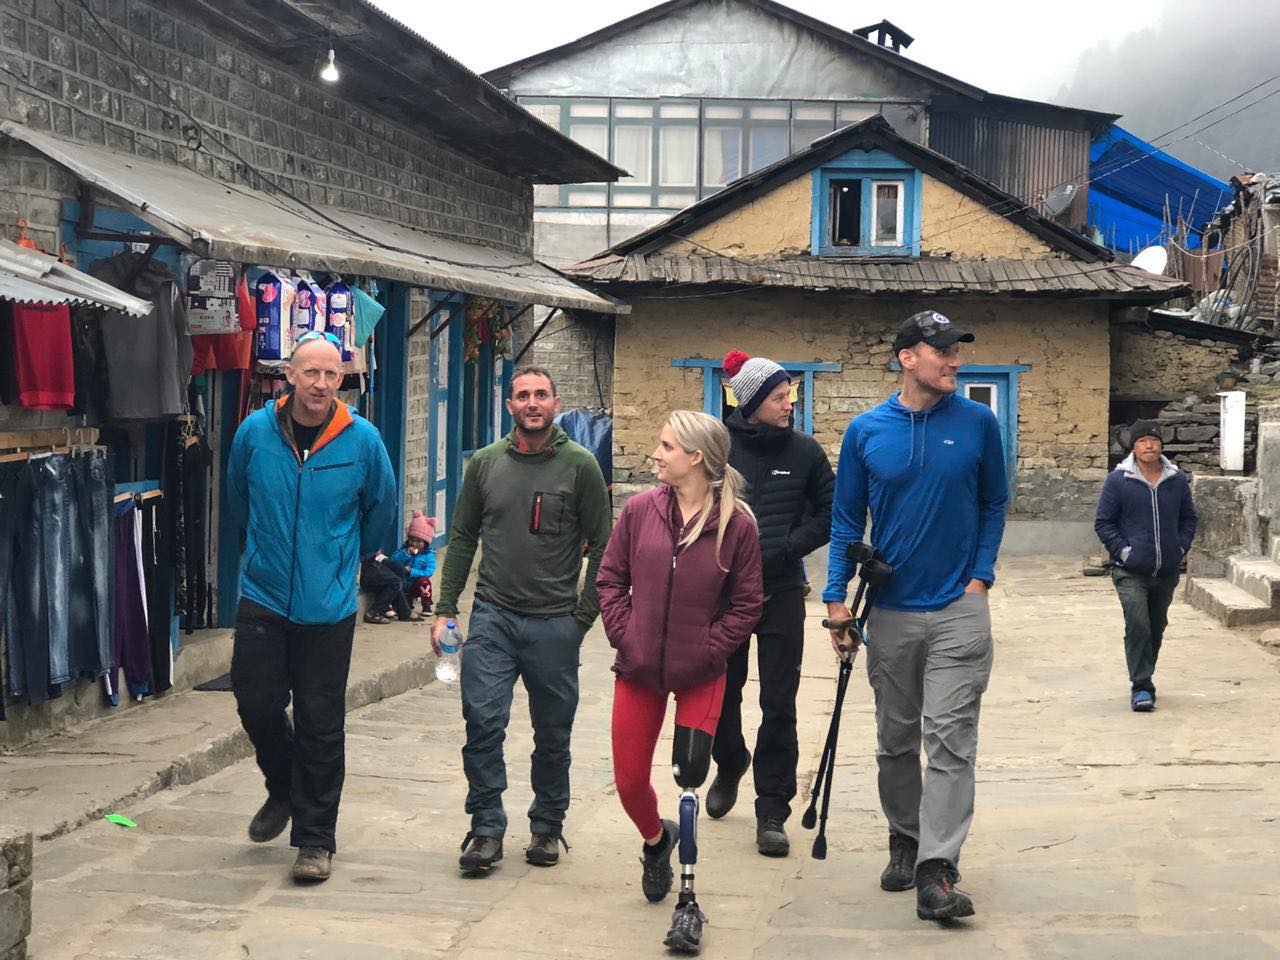  Kirstie and other expedition members at Lukla on Wednesday, April 3, 2019. Photo: Krishna Thapa Magar